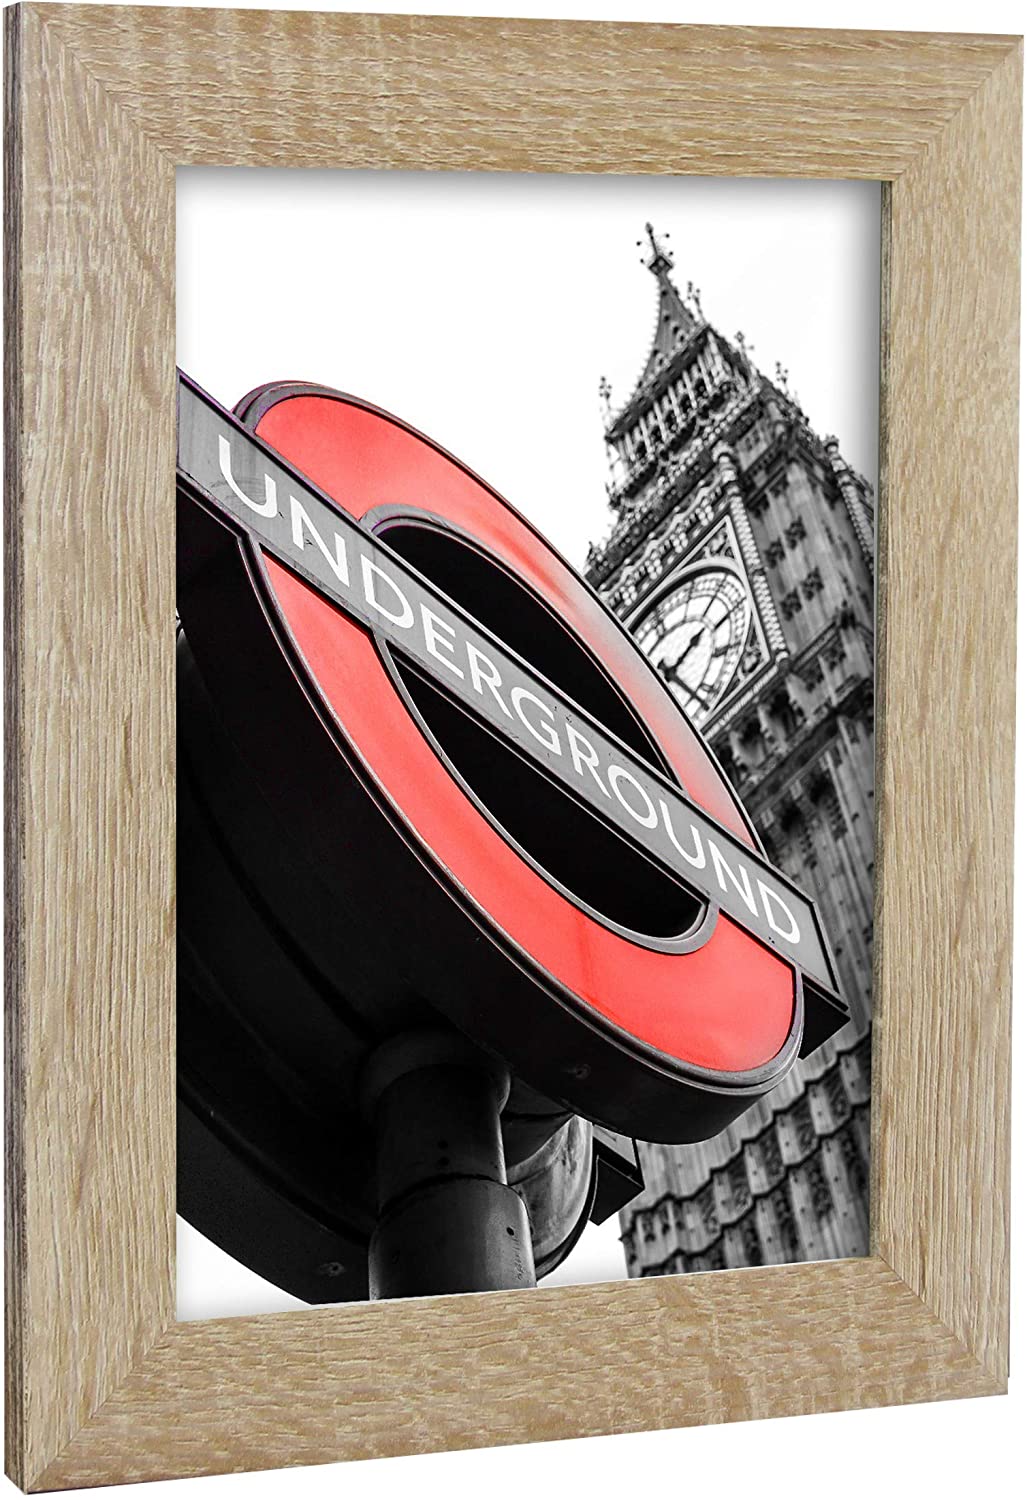 London Picture Frame Photo Frame 10 X 15 Cm White Picture Frame For Hanging